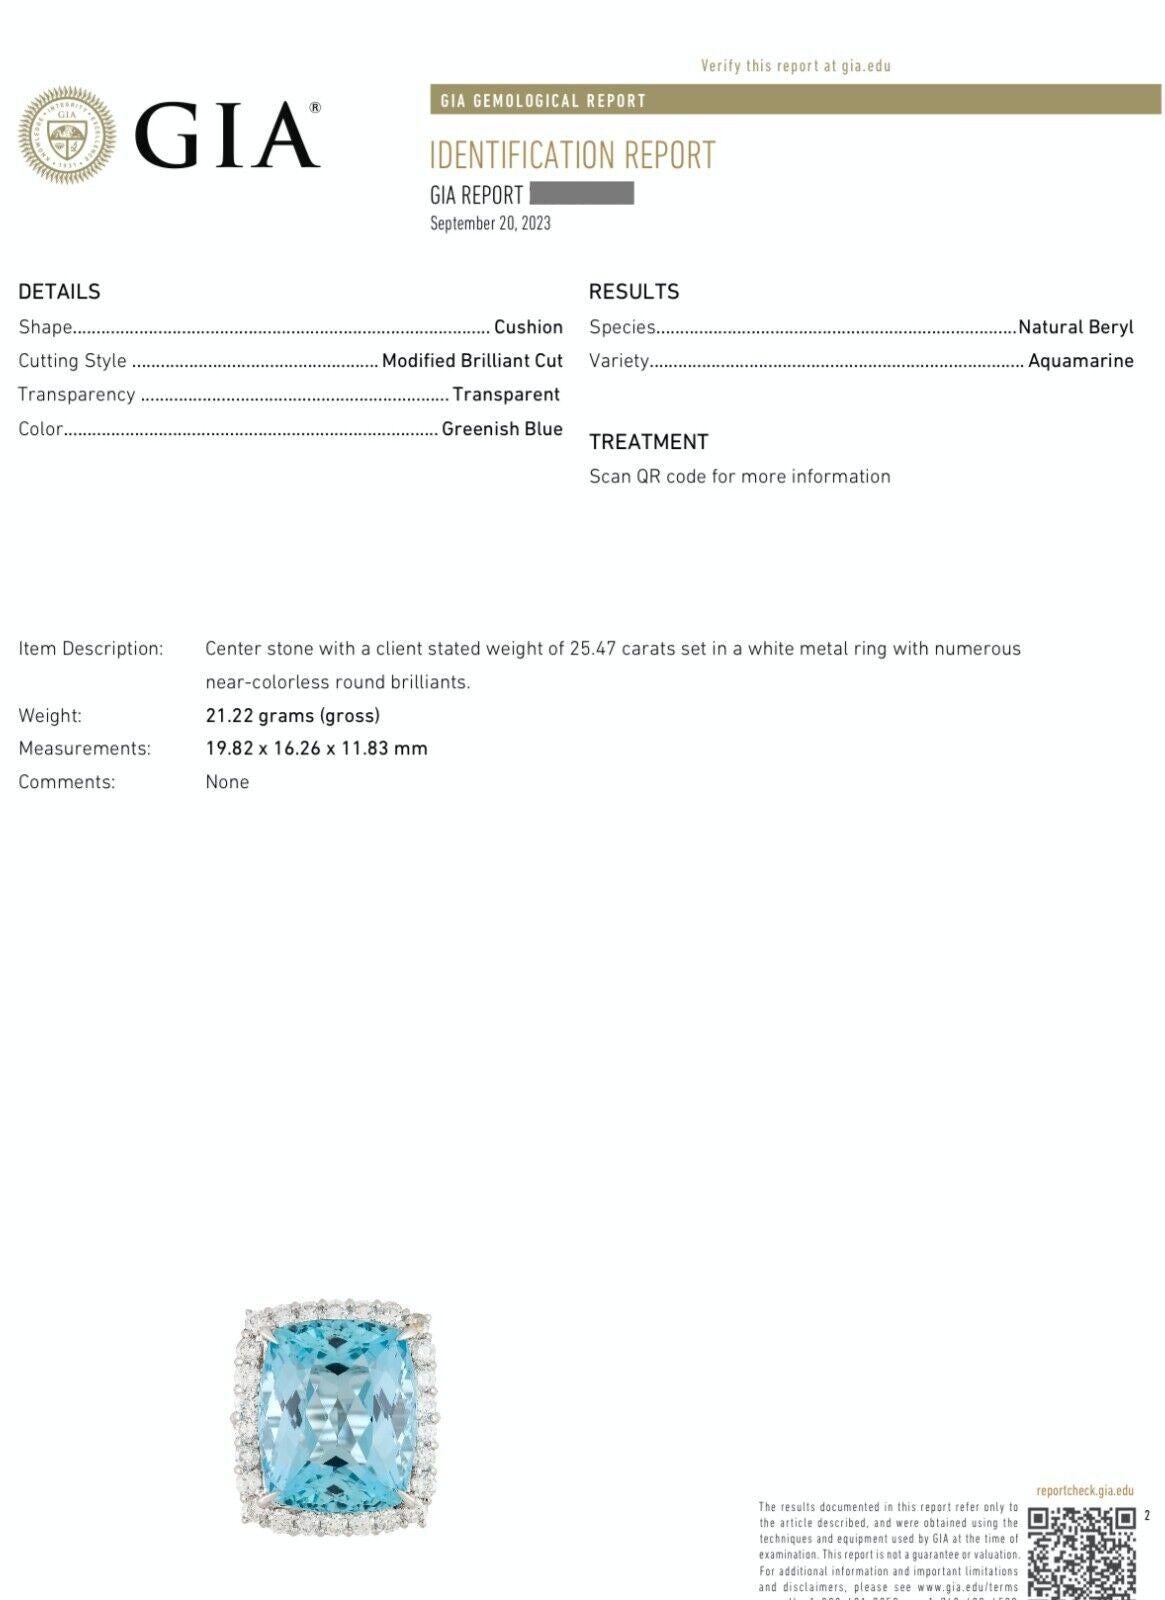 GIA Certified 25.47 Carat Aquamarine and Diamond Ring in Platinum

Aquamarine and Diamond Ring features a lively Elongated Cushion cut Aquamarine with Harlequin Facets surrounded by Round Brilliant Cut Diamonds set in Platinum.

Total aquamarine